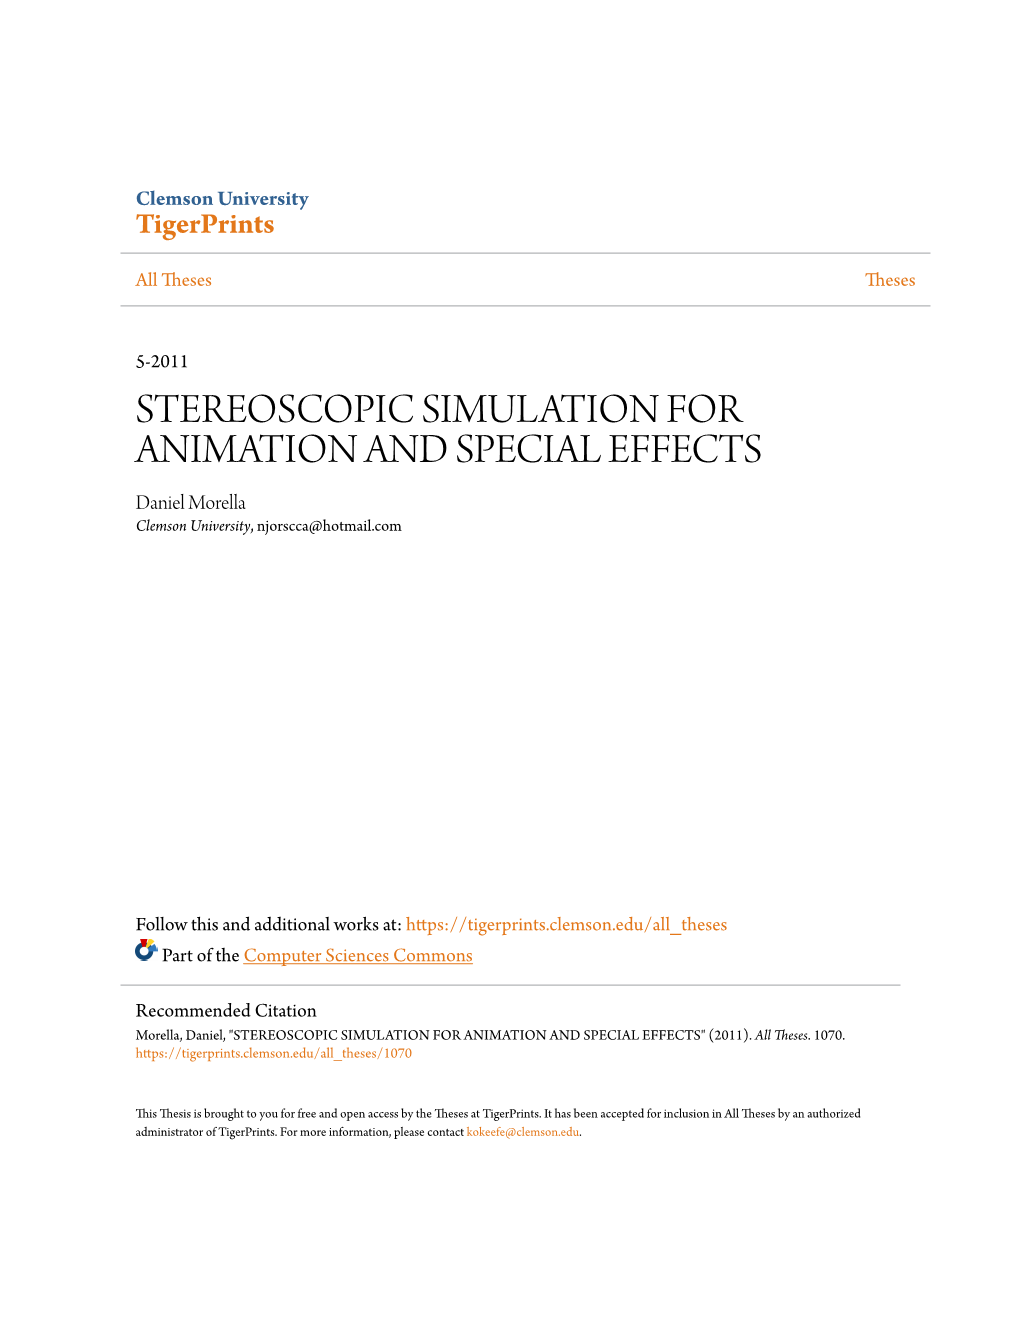 STEREOSCOPIC SIMULATION for ANIMATION and SPECIAL EFFECTS Daniel Morella Clemson University, Njorscca@Hotmail.Com